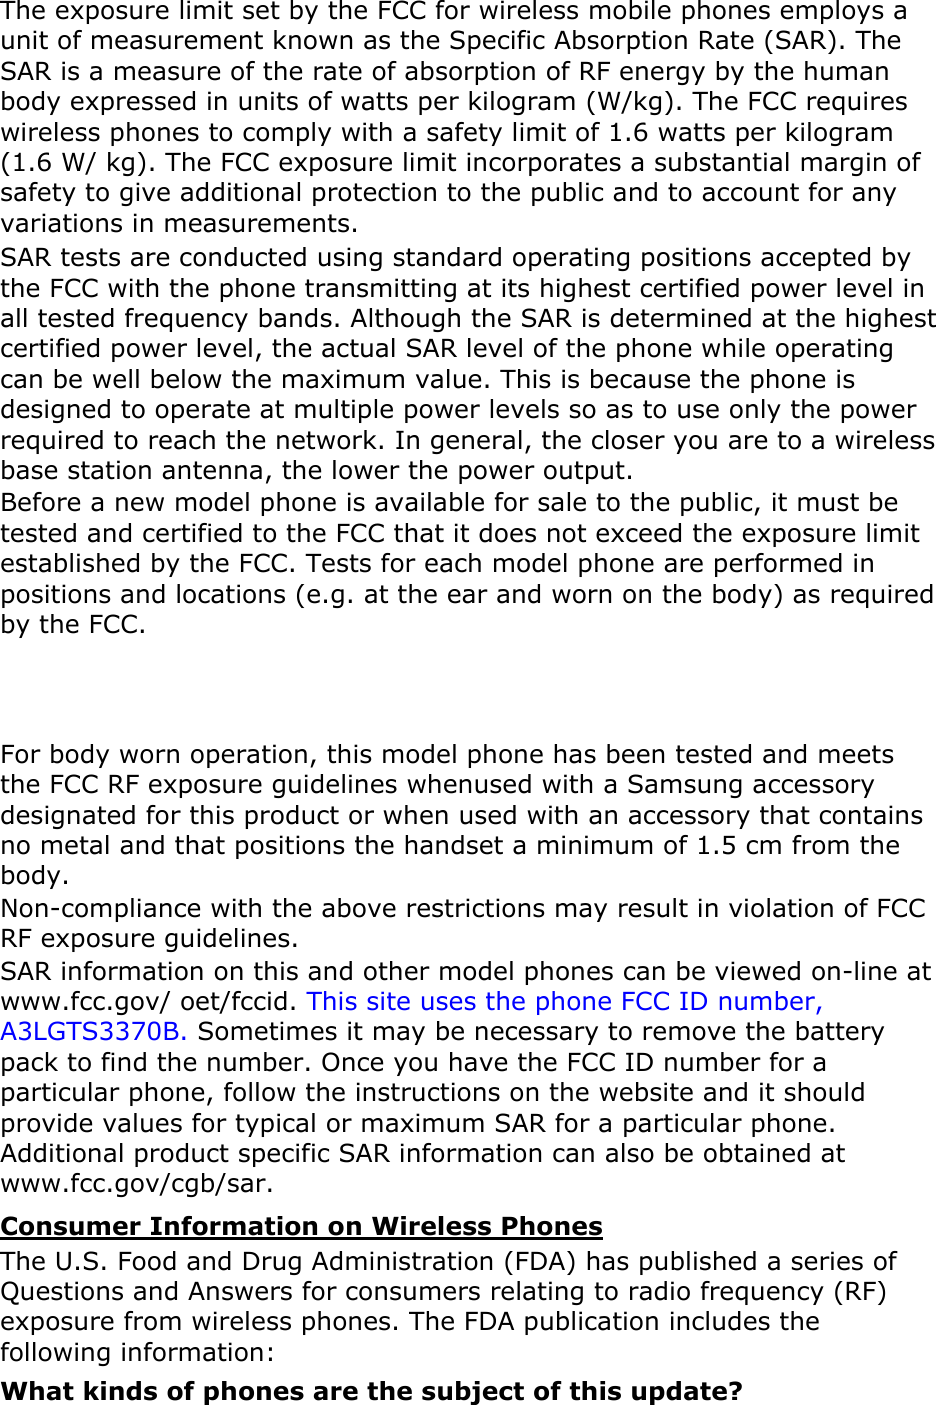   The exposure limit set by the FCC for wireless mobile phones employs a unit of measurement known as the Specific Absorption Rate (SAR). The SAR is a measure of the rate of absorption of RF energy by the human body expressed in units of watts per kilogram (W/kg). The FCC requires wireless phones to comply with a safety limit of 1.6 watts per kilogram (1.6 W/ kg). The FCC exposure limit incorporates a substantial margin of safety to give additional protection to the public and to account for any variations in measurements. SAR tests are conducted using standard operating positions accepted by the FCC with the phone transmitting at its highest certified power level in all tested frequency bands. Although the SAR is determined at the highest certified power level, the actual SAR level of the phone while operating can be well below the maximum value. This is because the phone is designed to operate at multiple power levels so as to use only the power required to reach the network. In general, the closer you are to a wireless base station antenna, the lower the power output. Before a new model phone is available for sale to the public, it must be tested and certified to the FCC that it does not exceed the exposure limit established by the FCC. Tests for each model phone are performed in positions and locations (e.g. at the ear and worn on the body) as required by the FCC.     For body worn operation, this model phone has been tested and meets the FCC RF exposure guidelines whenused with a Samsung accessory designated for this product or when used with an accessory that contains no metal and that positions the handset a minimum of 1.5 cm from the body.  Non-compliance with the above restrictions may result in violation of FCC RF exposure guidelines. SAR information on this and other model phones can be viewed on-line at www.fcc.gov/ oet/fccid. This site uses the phone FCC ID number, A3LGTS3370B. Sometimes it may be necessary to remove the battery pack to find the number. Once you have the FCC ID number for a particular phone, follow the instructions on the website and it should provide values for typical or maximum SAR for a particular phone. Additional product specific SAR information can also be obtained at www.fcc.gov/cgb/sar. Consumer Information on Wireless Phones The U.S. Food and Drug Administration (FDA) has published a series of Questions and Answers for consumers relating to radio frequency (RF) exposure from wireless phones. The FDA publication includes the following information: What kinds of phones are the subject of this update? 